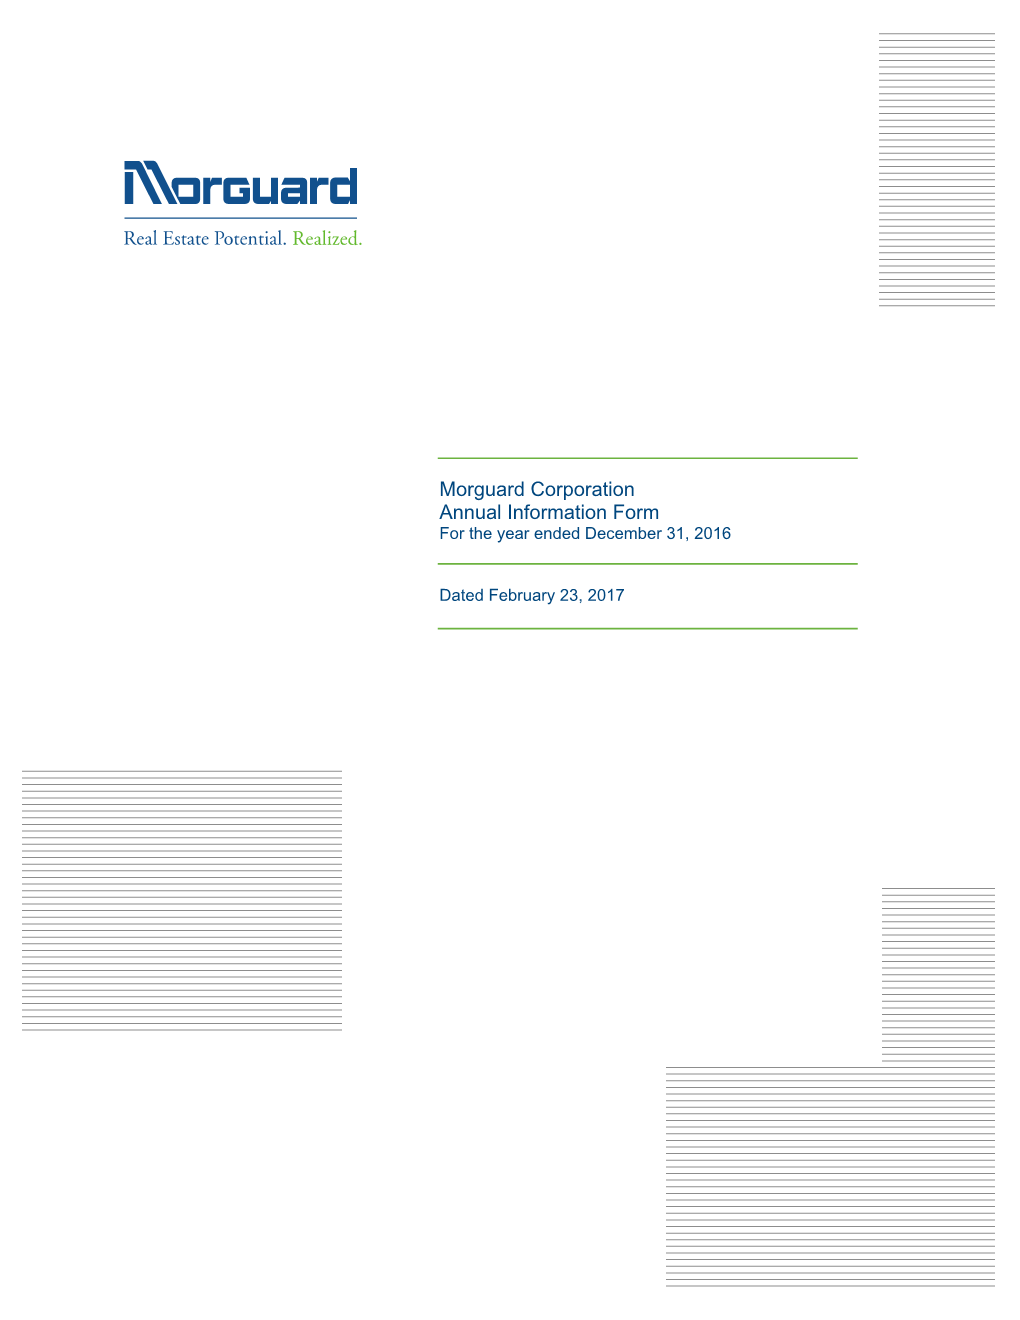 Morguard Corporation Annual Information Form for the Year Ended December 31, 2016